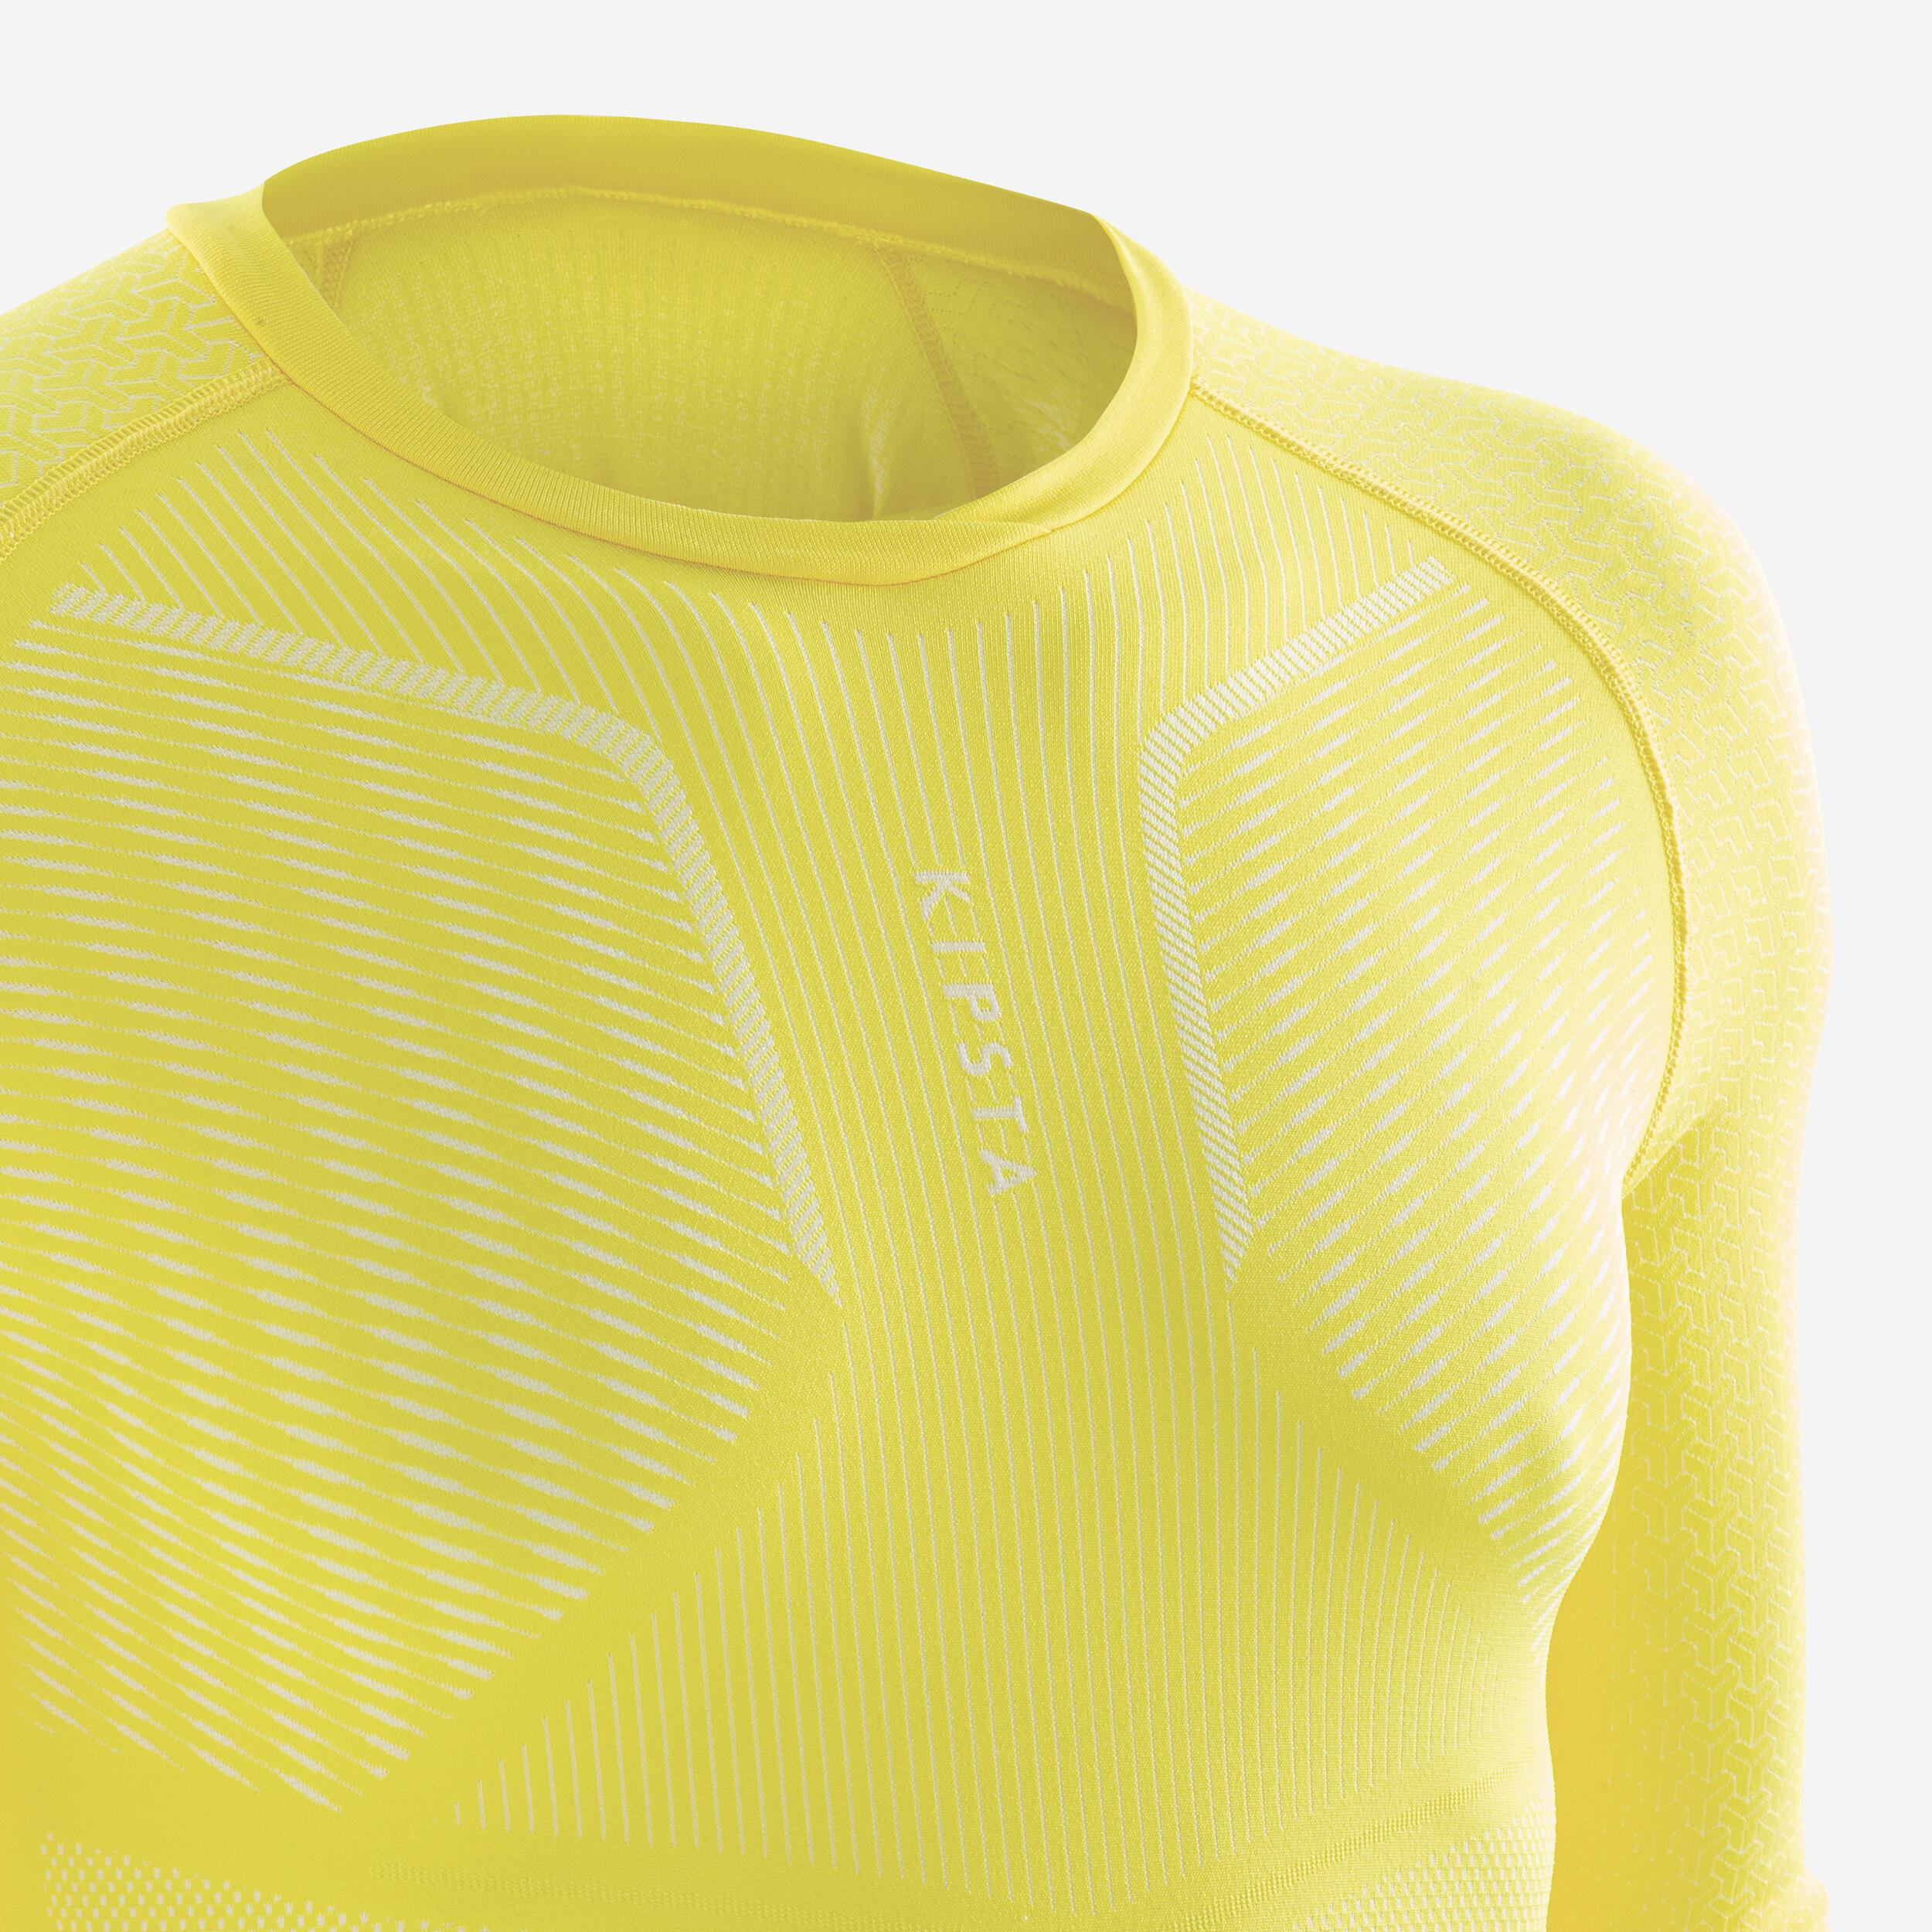 Adult Long-Sleeved Thermal Base Layer Top Keepdry 500 - Yellow 12/15